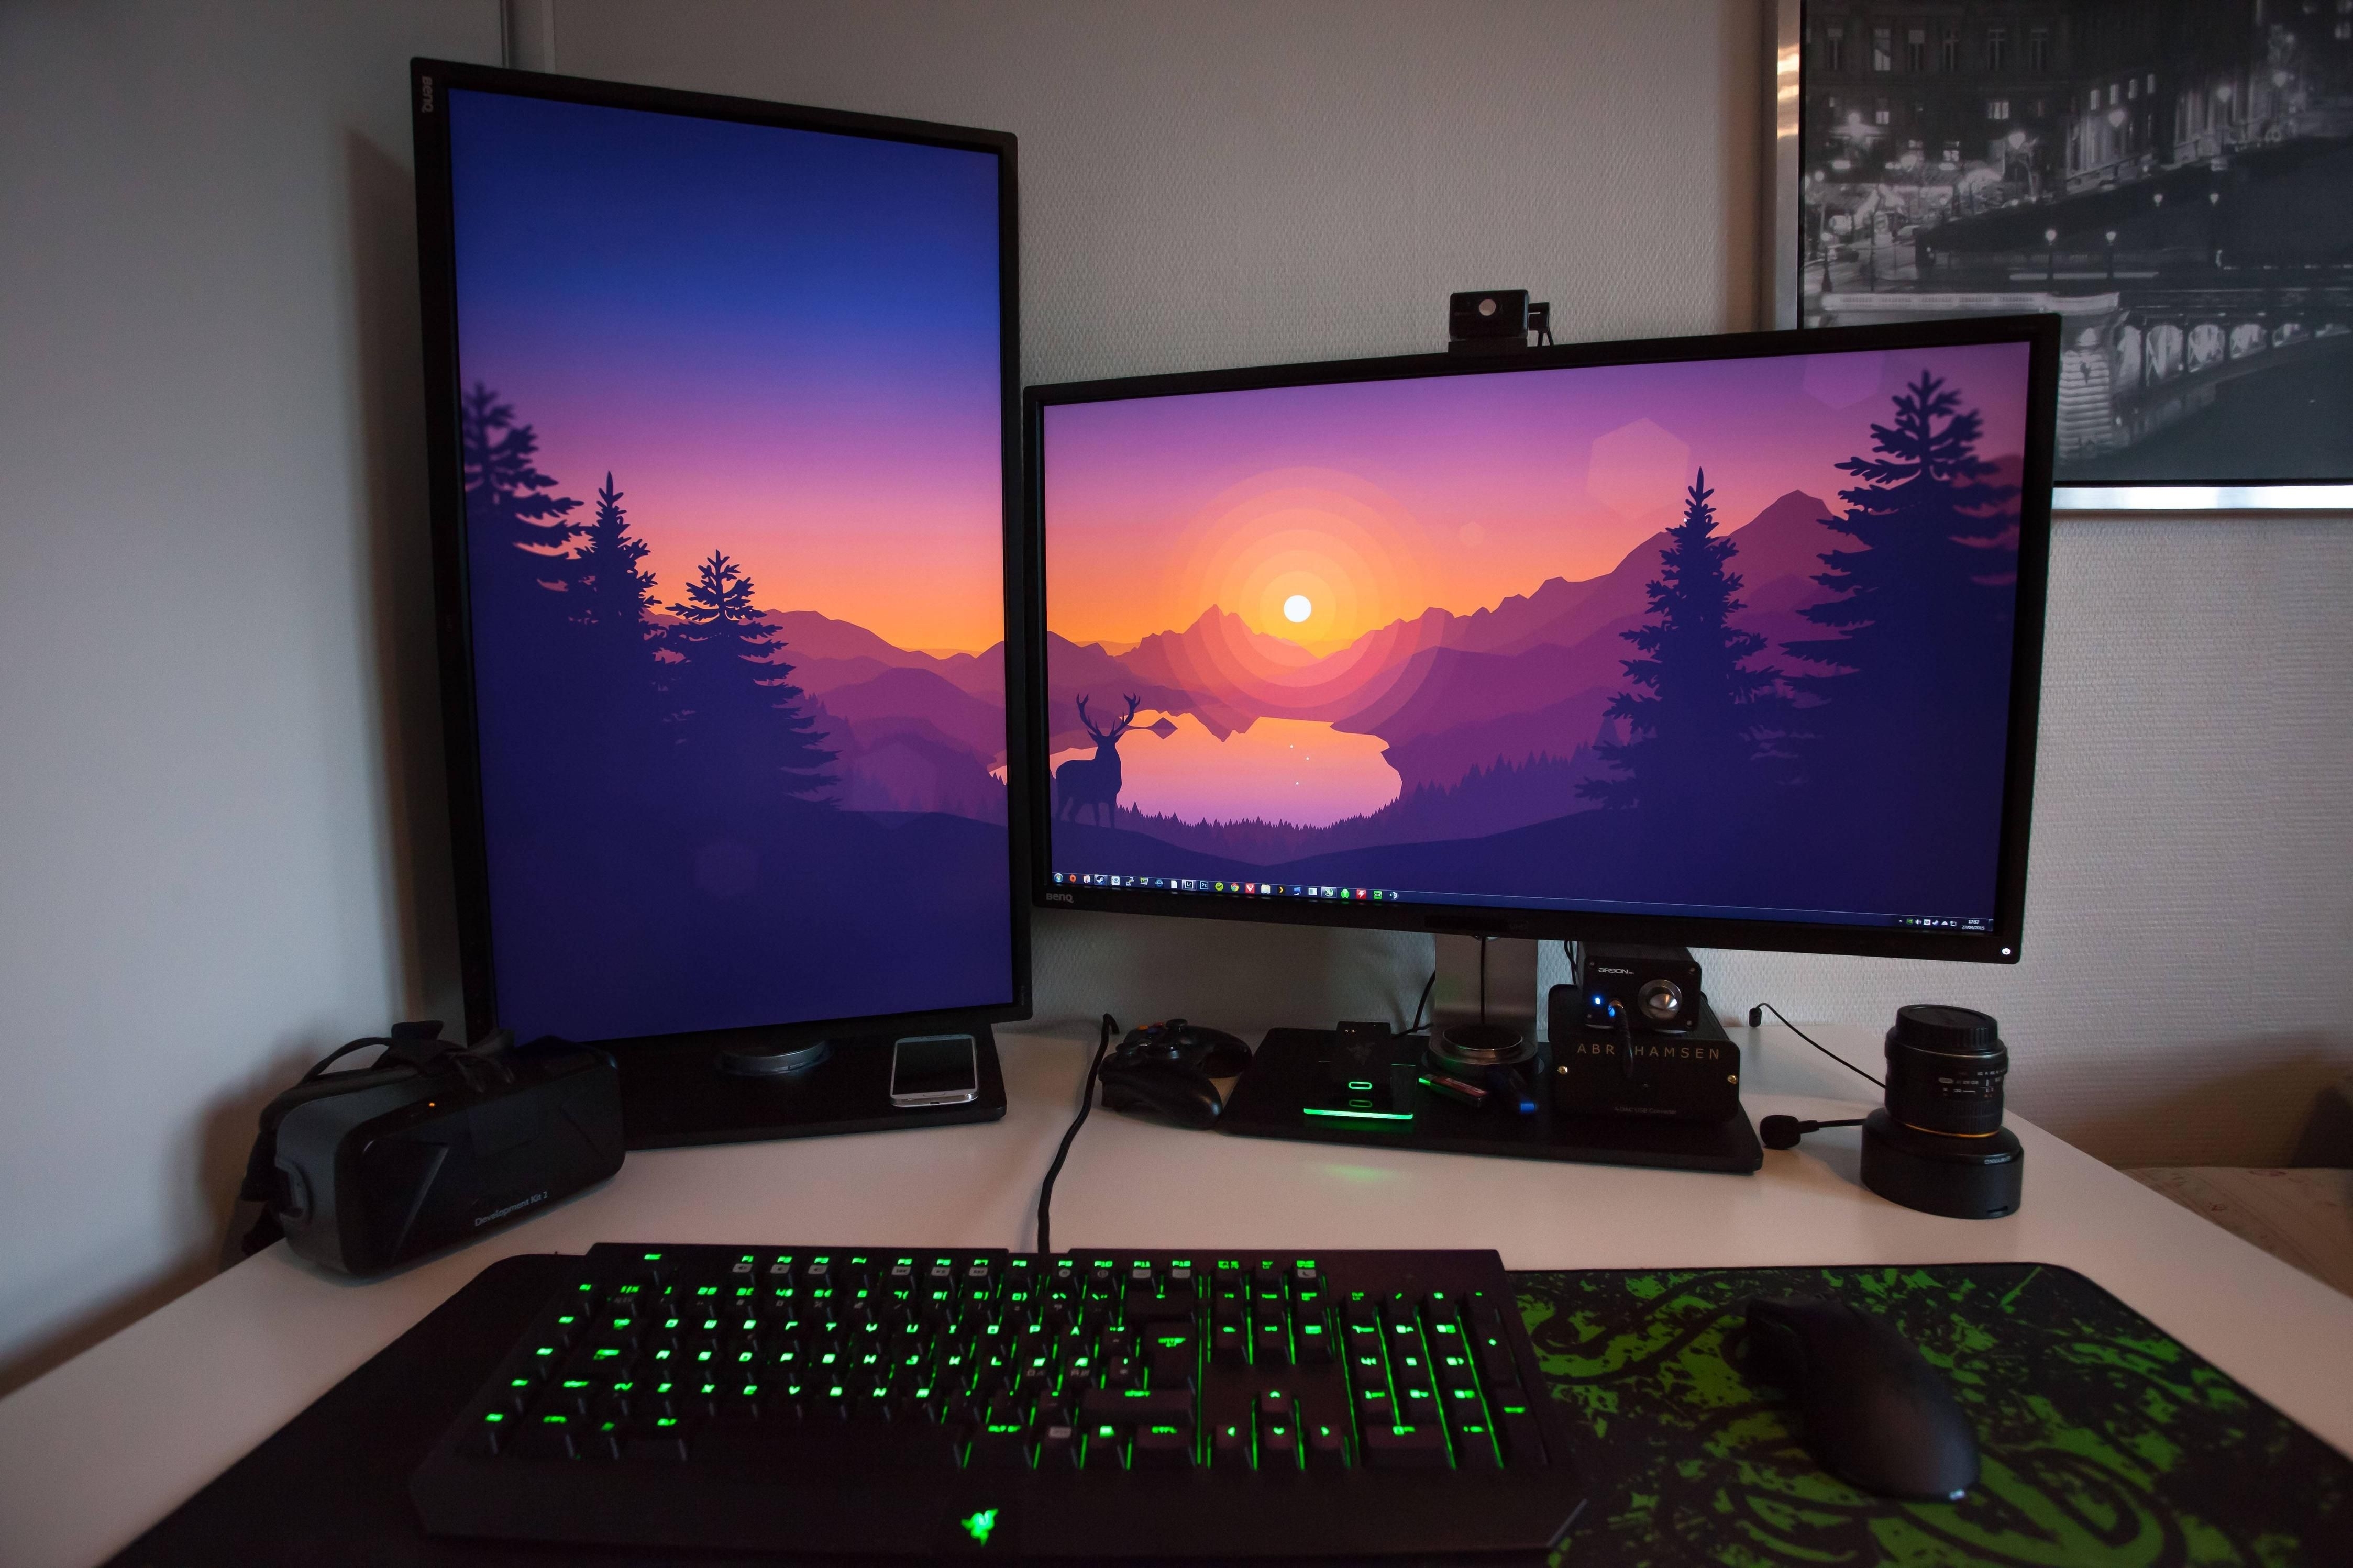 10 New Setup Dual Monitor Wallpaper FULL HD 1920×1080 For PC Background